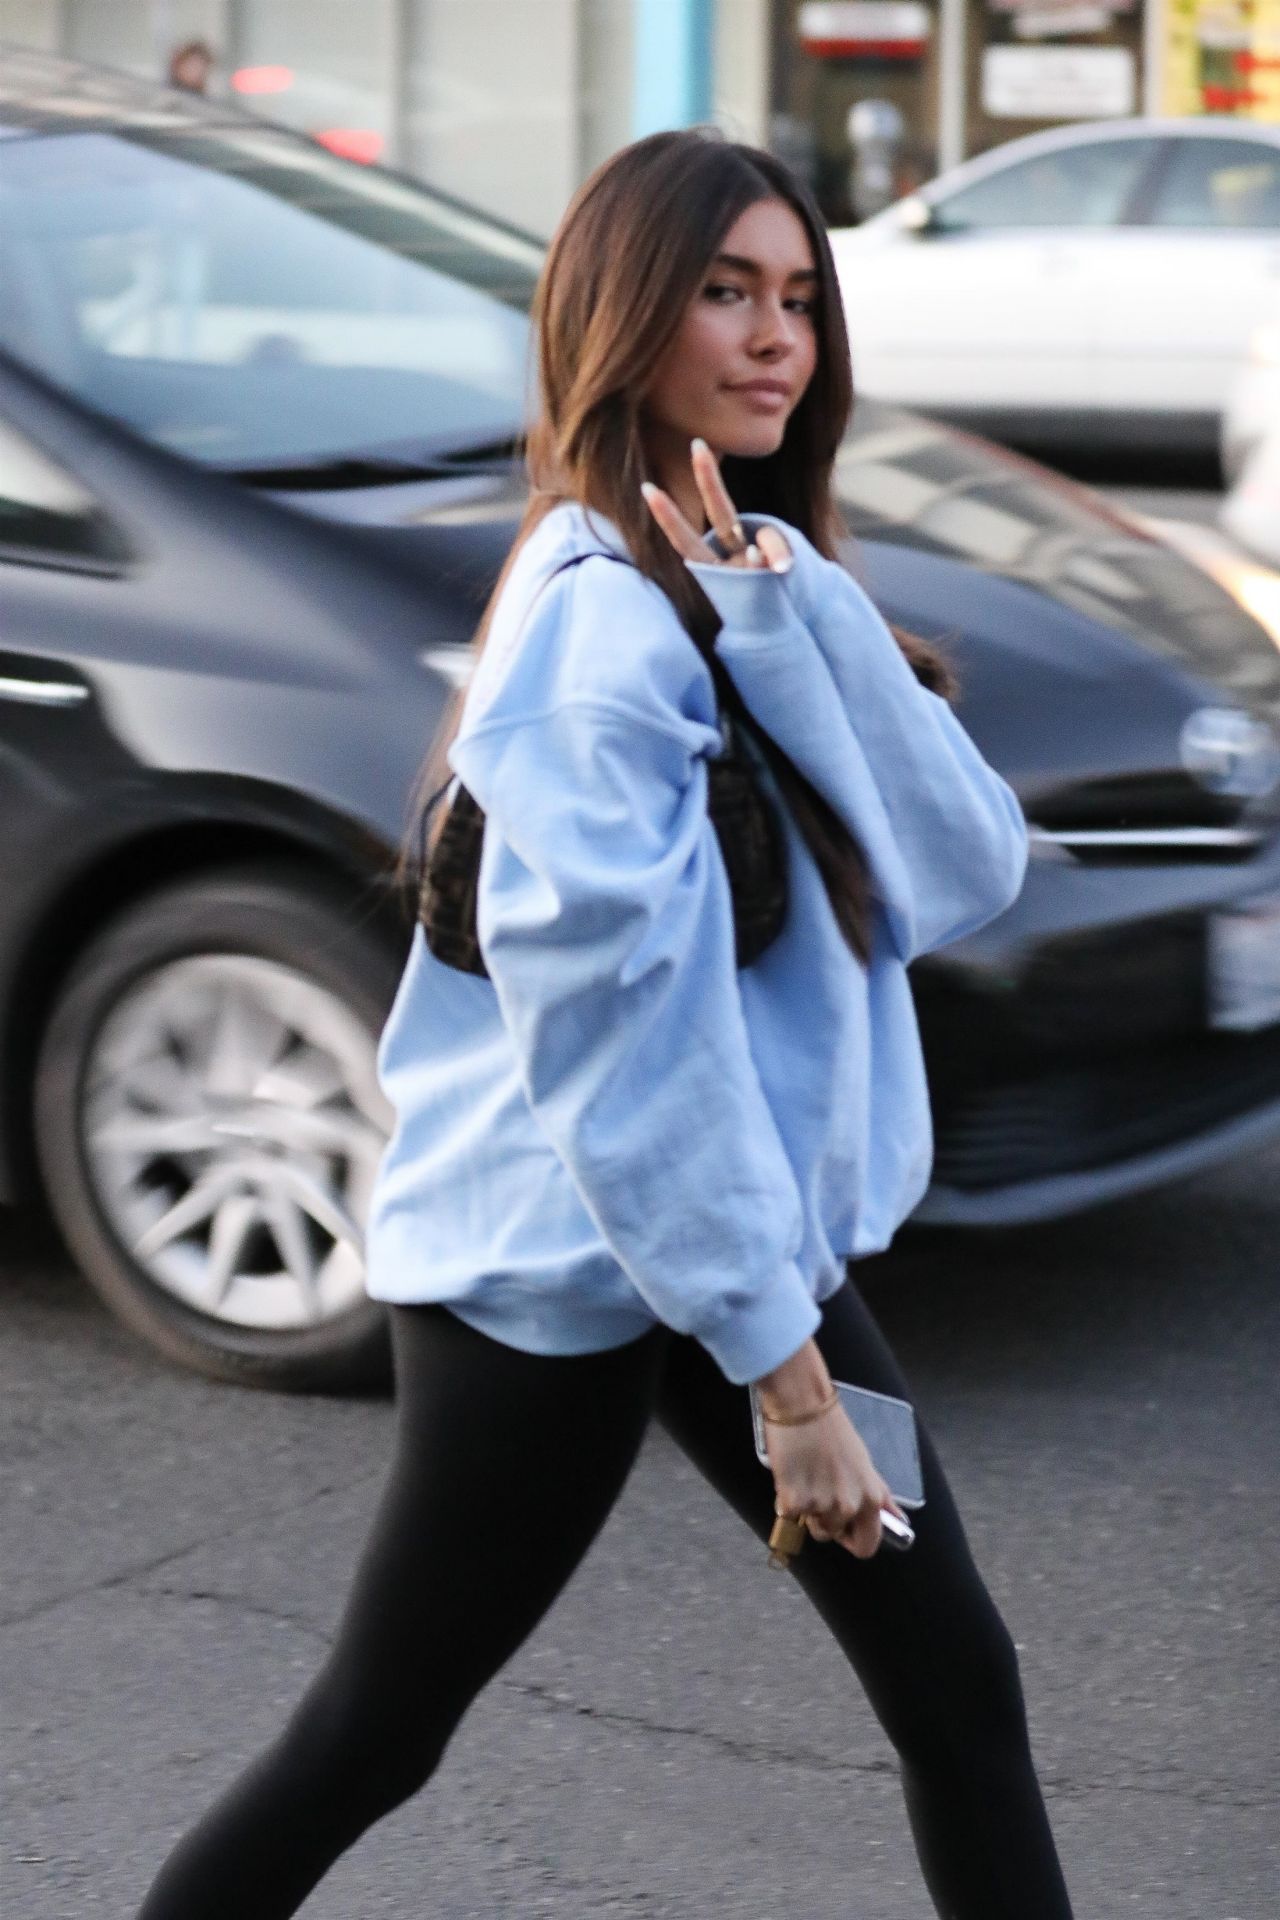 Madison Beer West Hollywood February 13, 2019 – Star Style